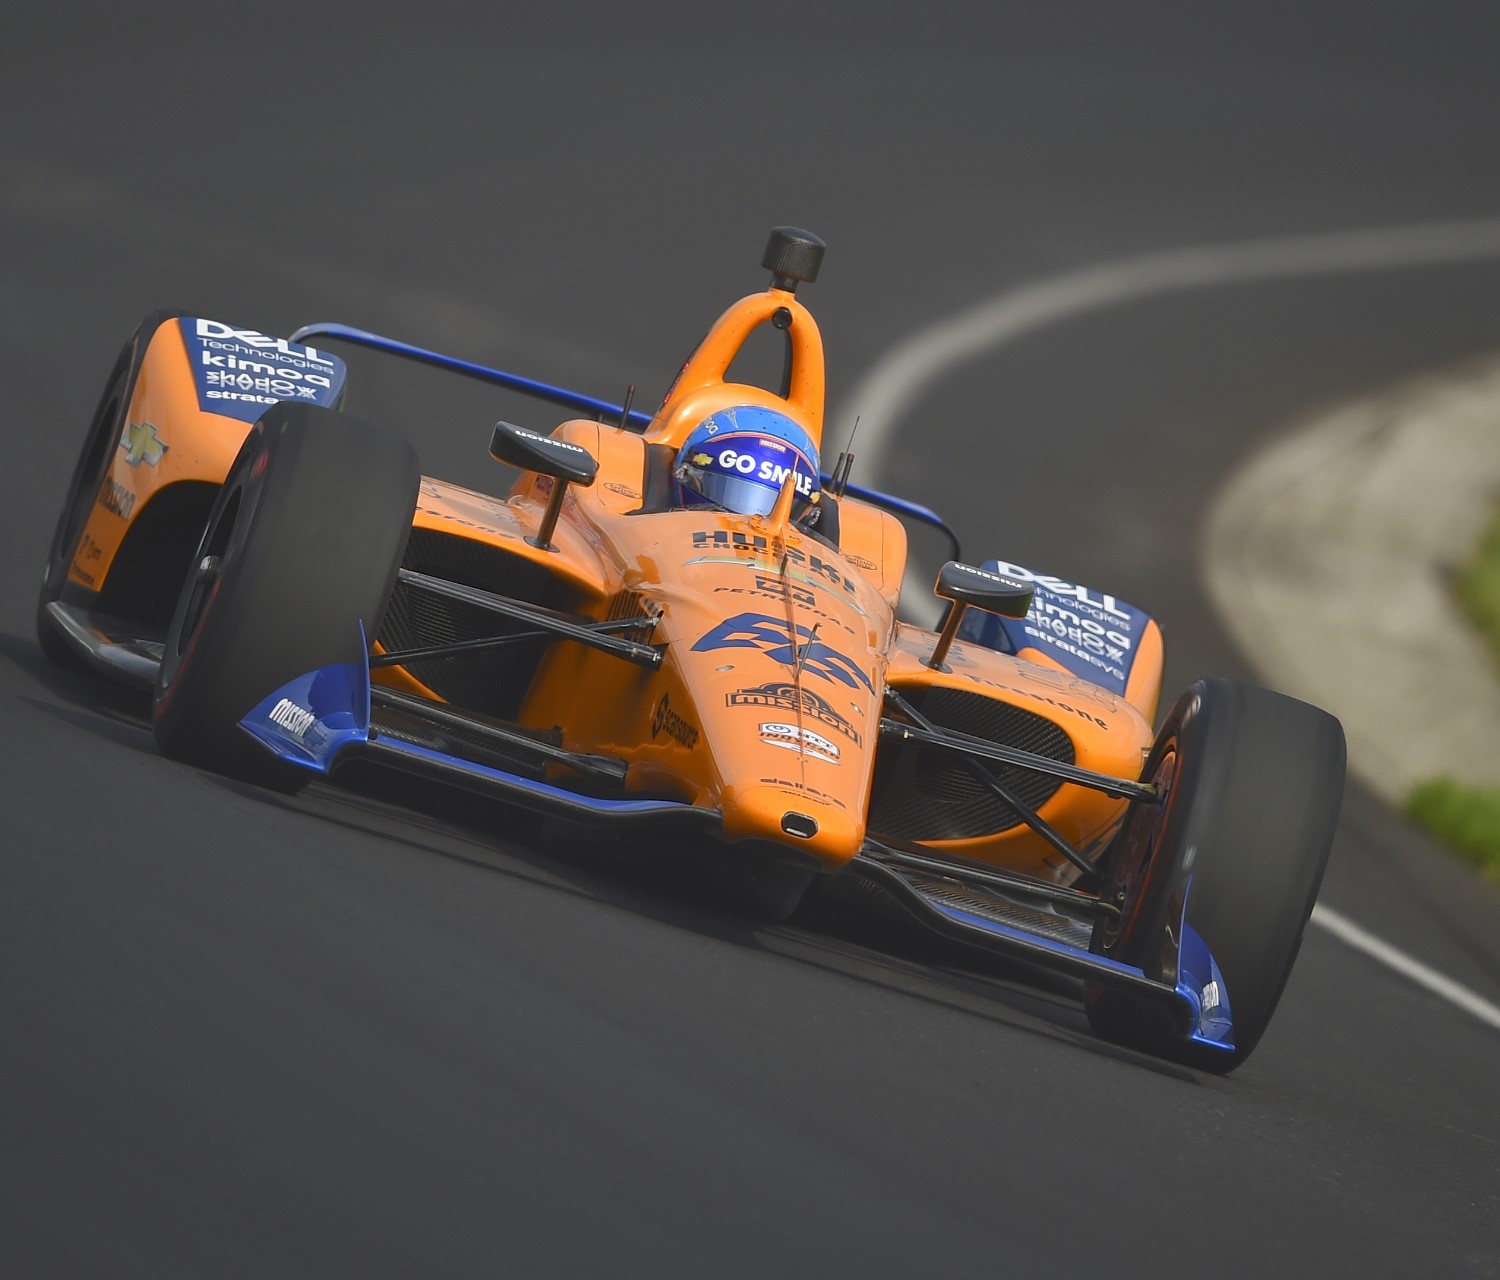 Alonso in the dog slow McLaren F1 prepared 2019 IndyCar